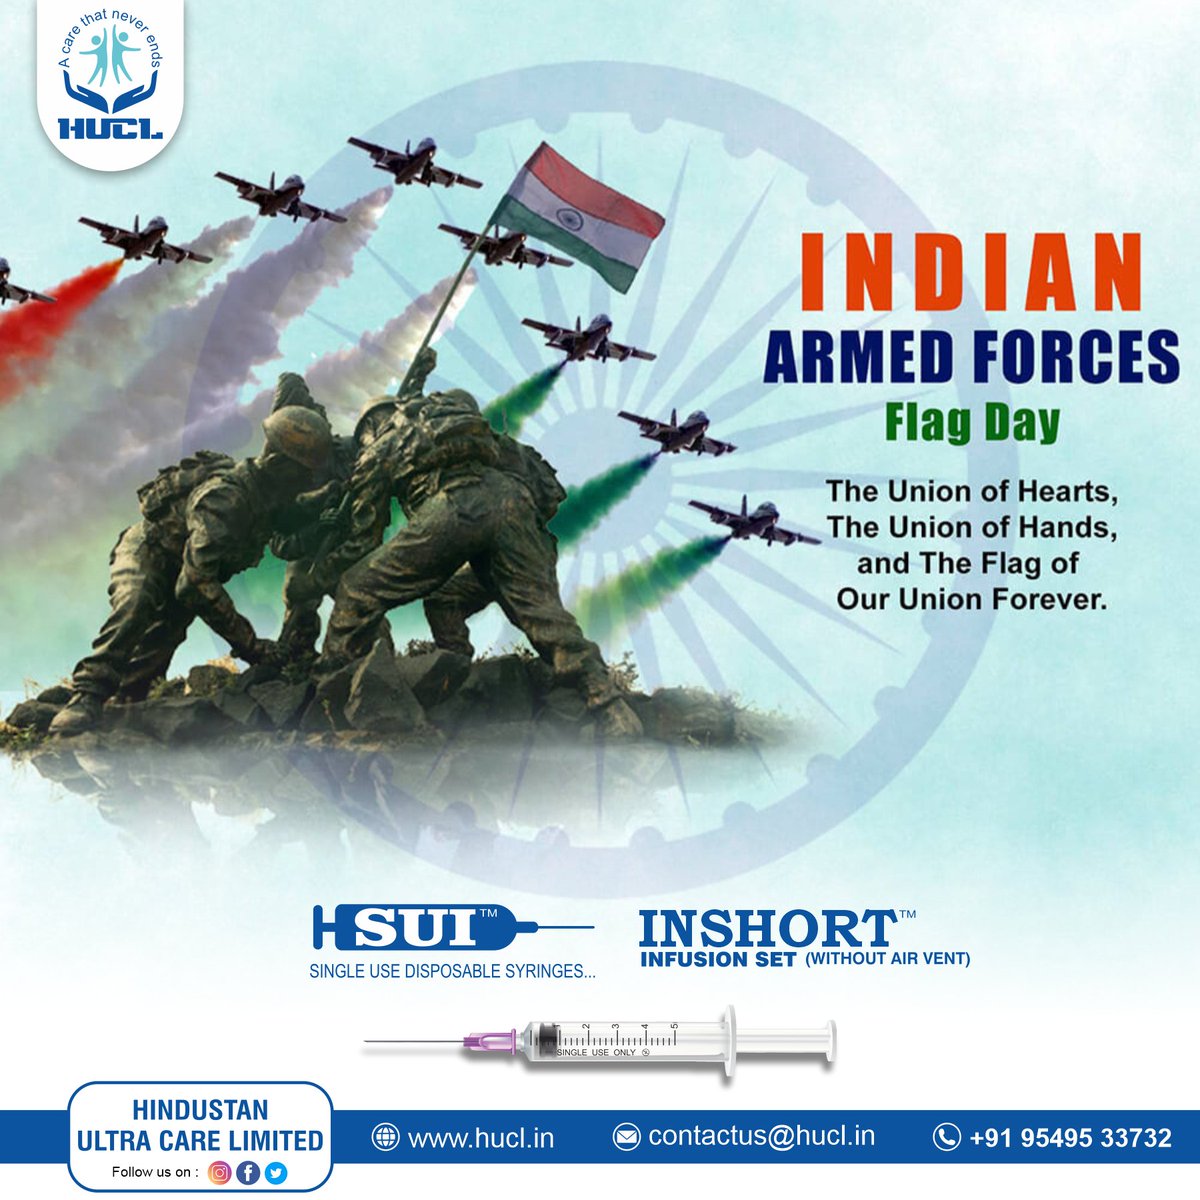 INDIAN ARMED FORCES
Flag Day

hucl.in
facebook.com/HUCLimited
instagram.com/huclimited/

#loveindianarmy #indianarmylover #thankyouindianarmy #joinindianarmy #salutetoindianarmy #indianarmyfan 
#supportindianarmy #indianarmyzindabad #britishindianarmy